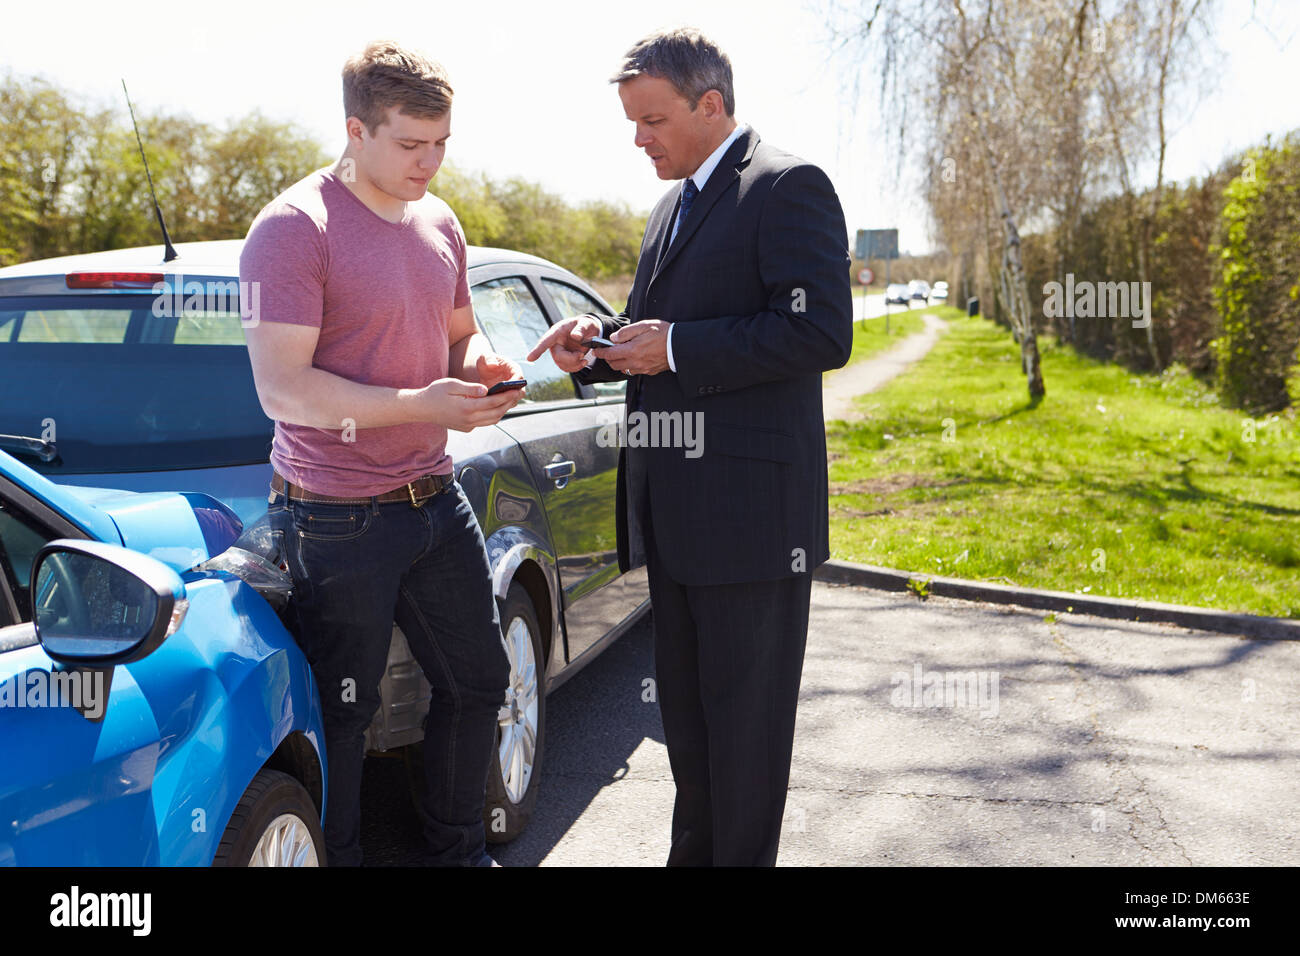 Two Drivers Exchange Insurance Details After Accident Stock Photo